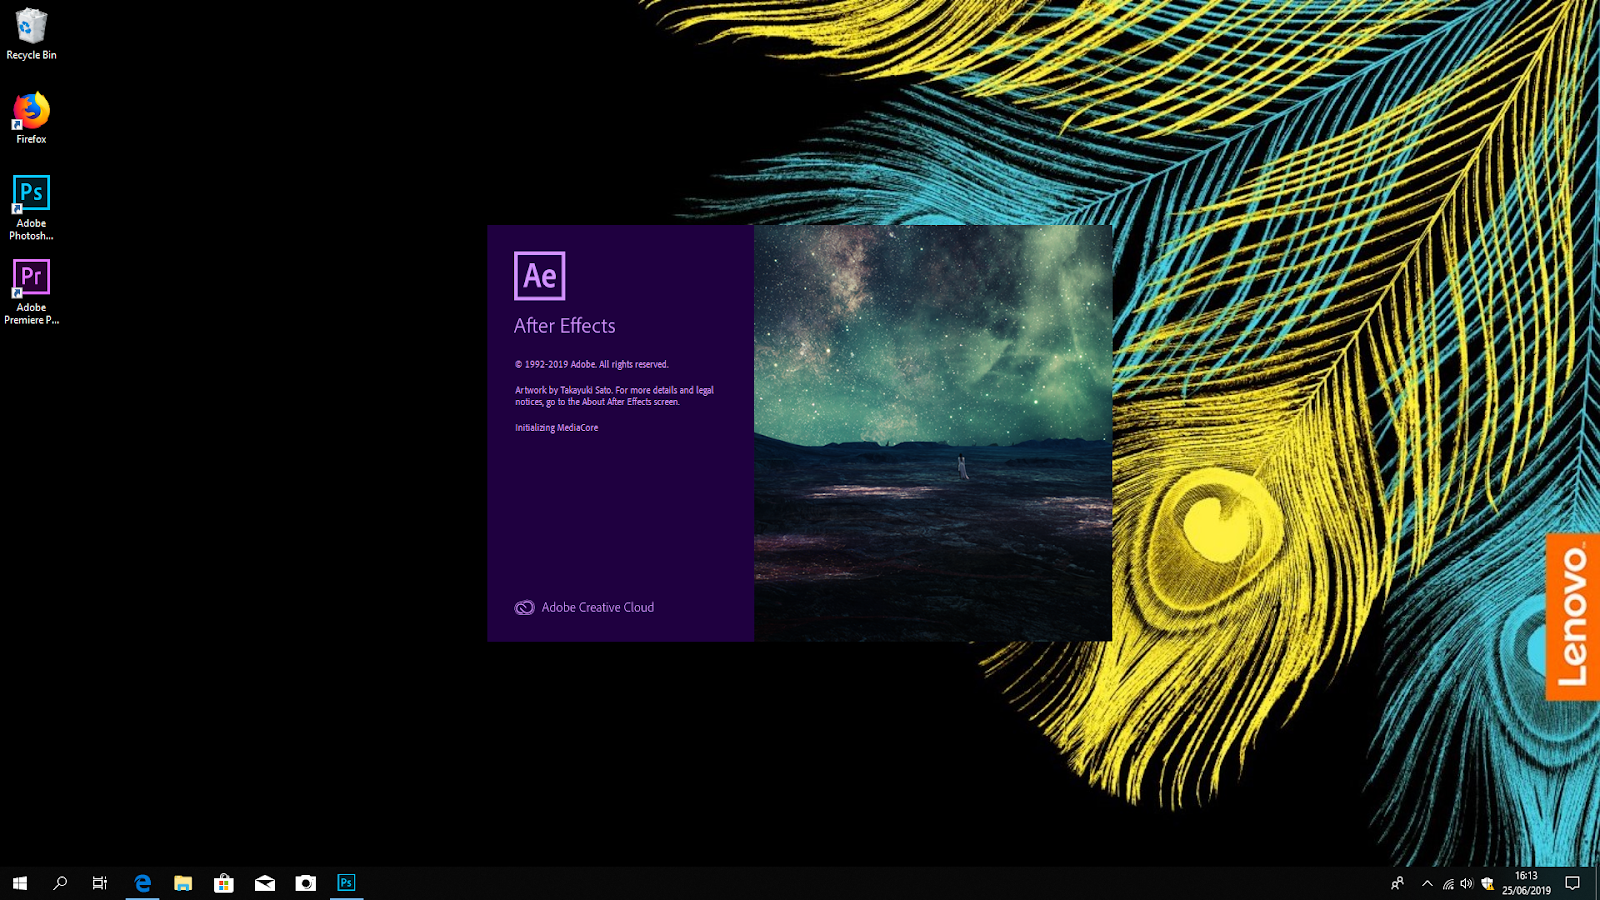 Adobe After Effects CC 2019 v16.1.2